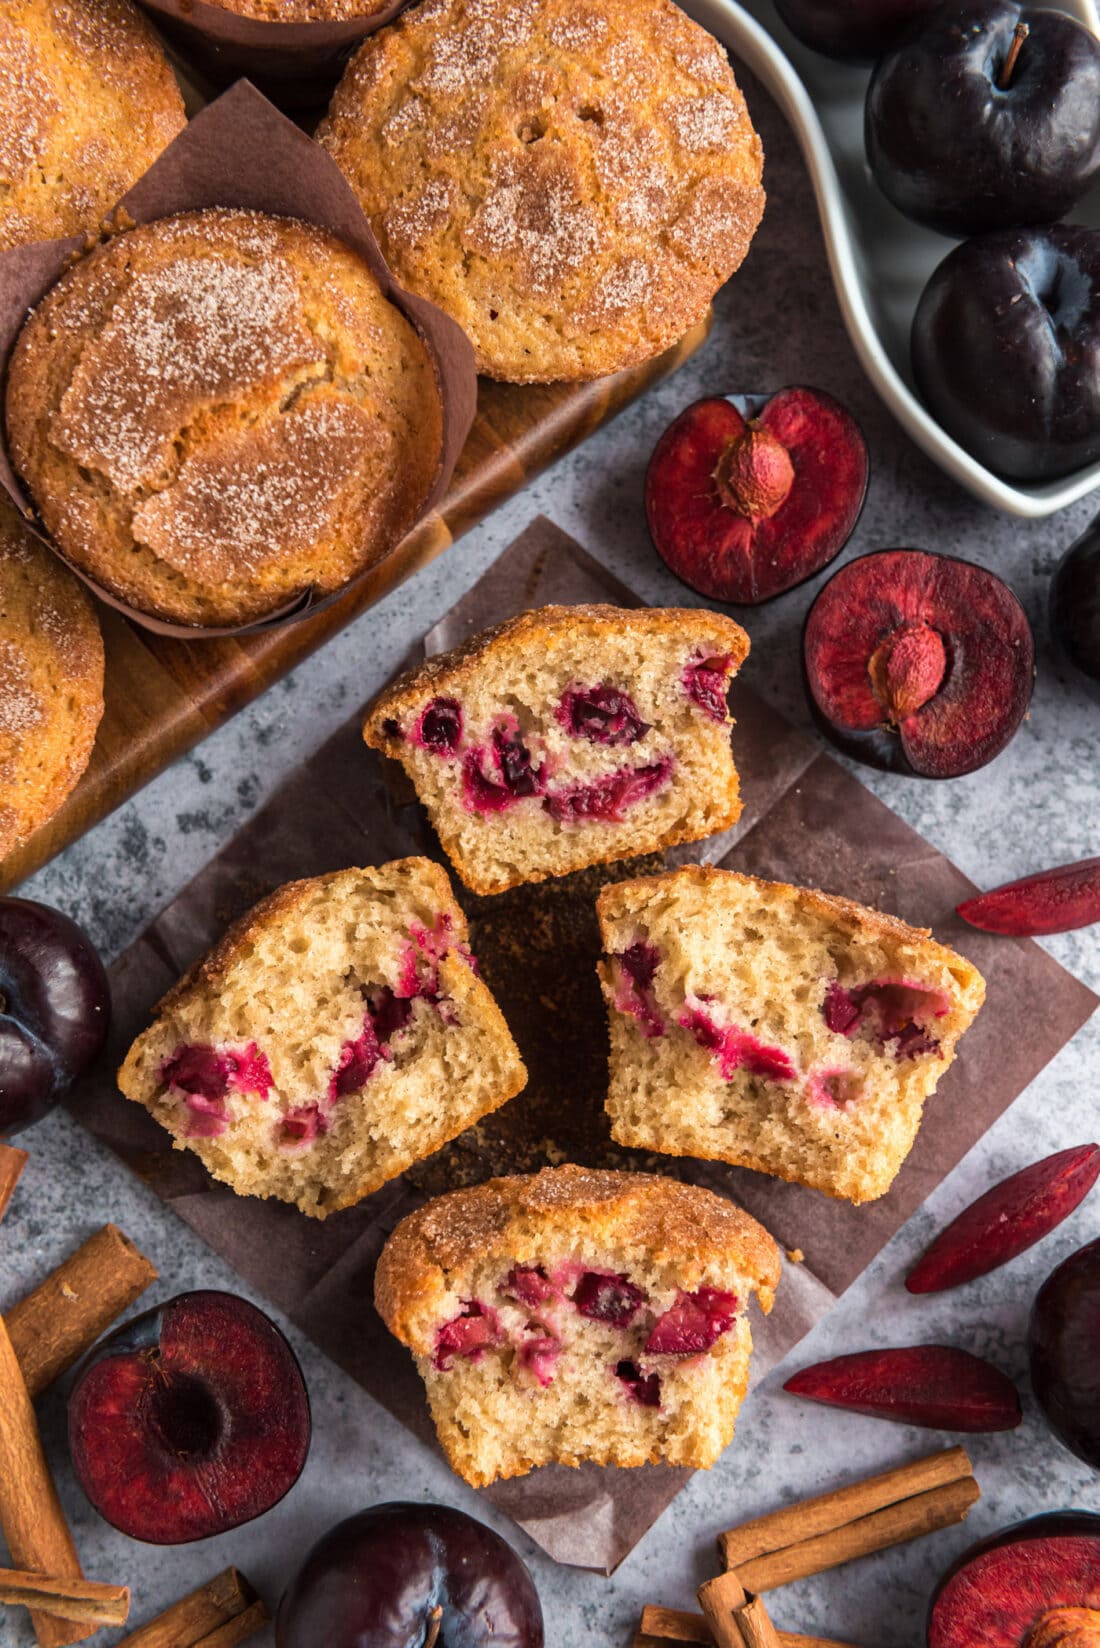 Two Sugar Crusted Plum Muffins cut in half on parchment paper